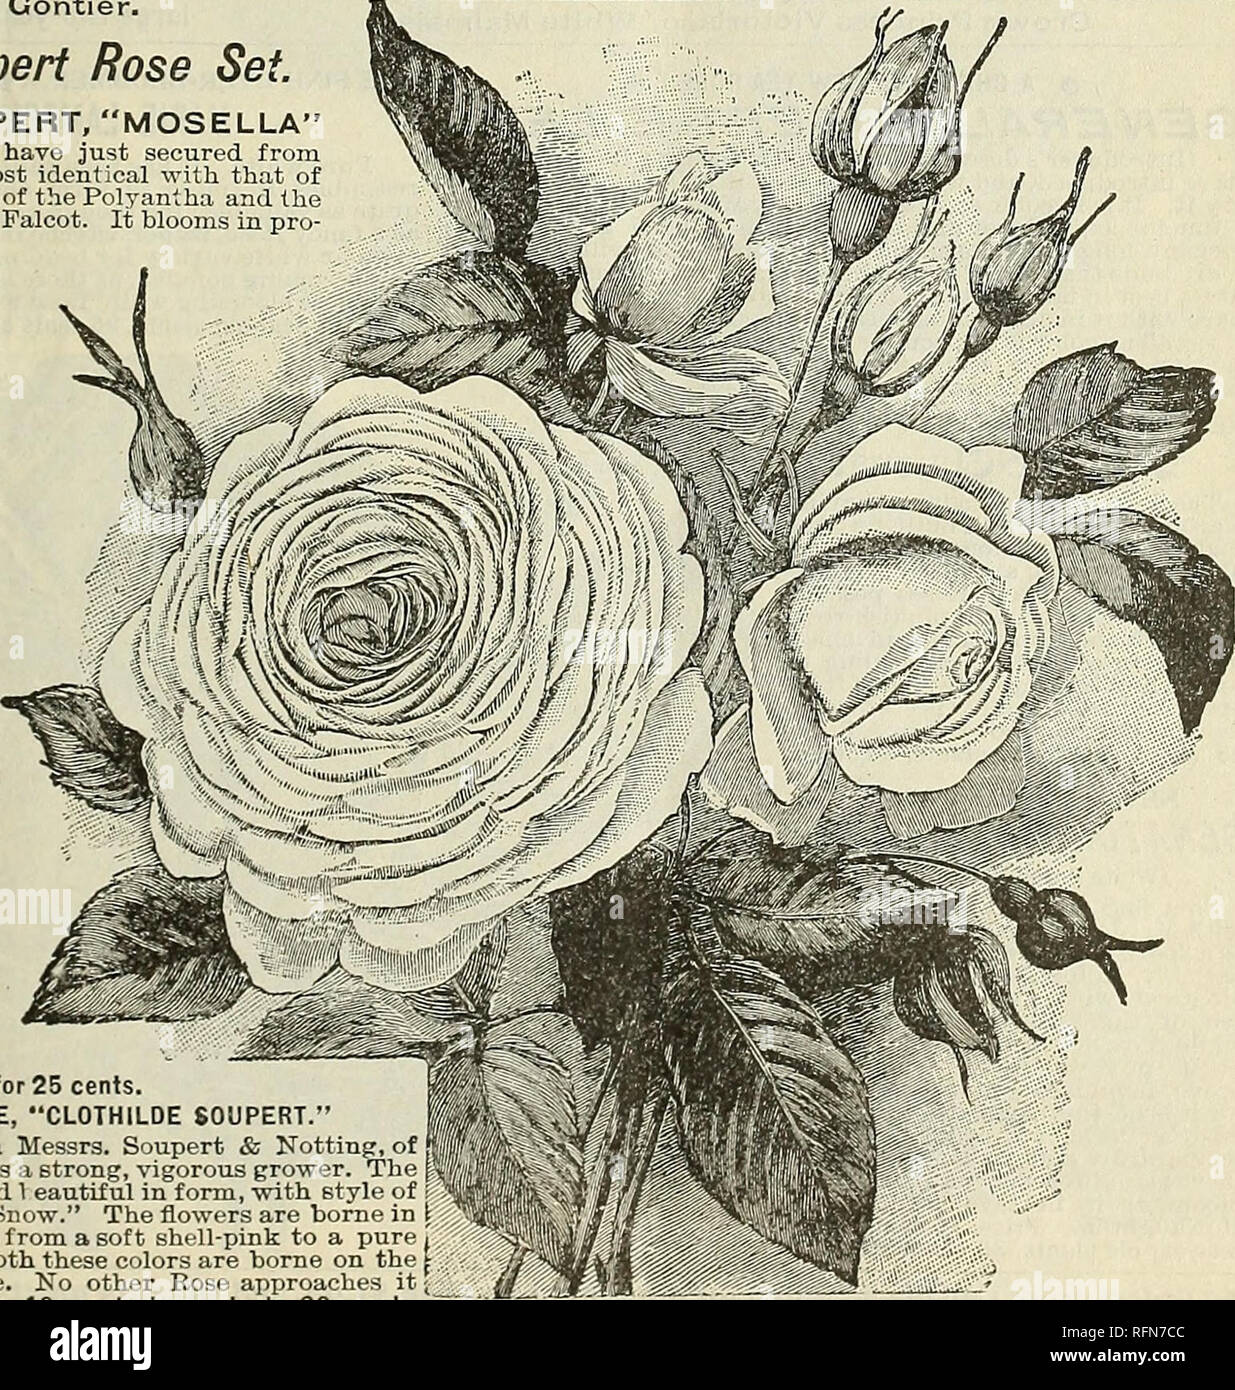 . Floral gems : 1897. Flowers Seeds Catalogs; Bulbs (Plants) Catalogs; Roses Catalogs; Plants, Ornamental Catalogs; Commercial catalogs Ohio Springfield. jFine Crimson XLai TRose Jj^Â£|pU (30tttlCV GRAND RED TEA, of fine crimson shade and silken tex- ly ture (as distinct from velvety texture). The bud is fine y sine and graceful form, and you would never suspect from / l it that the Rose is only semi-double. Extremely free, both in growth and bloom. Very long and beautifully-leaved stems can be cut, the foliage being very dark and heavy. One of the best, and a perfect bedder. Price, 10 cents  Stock Photo